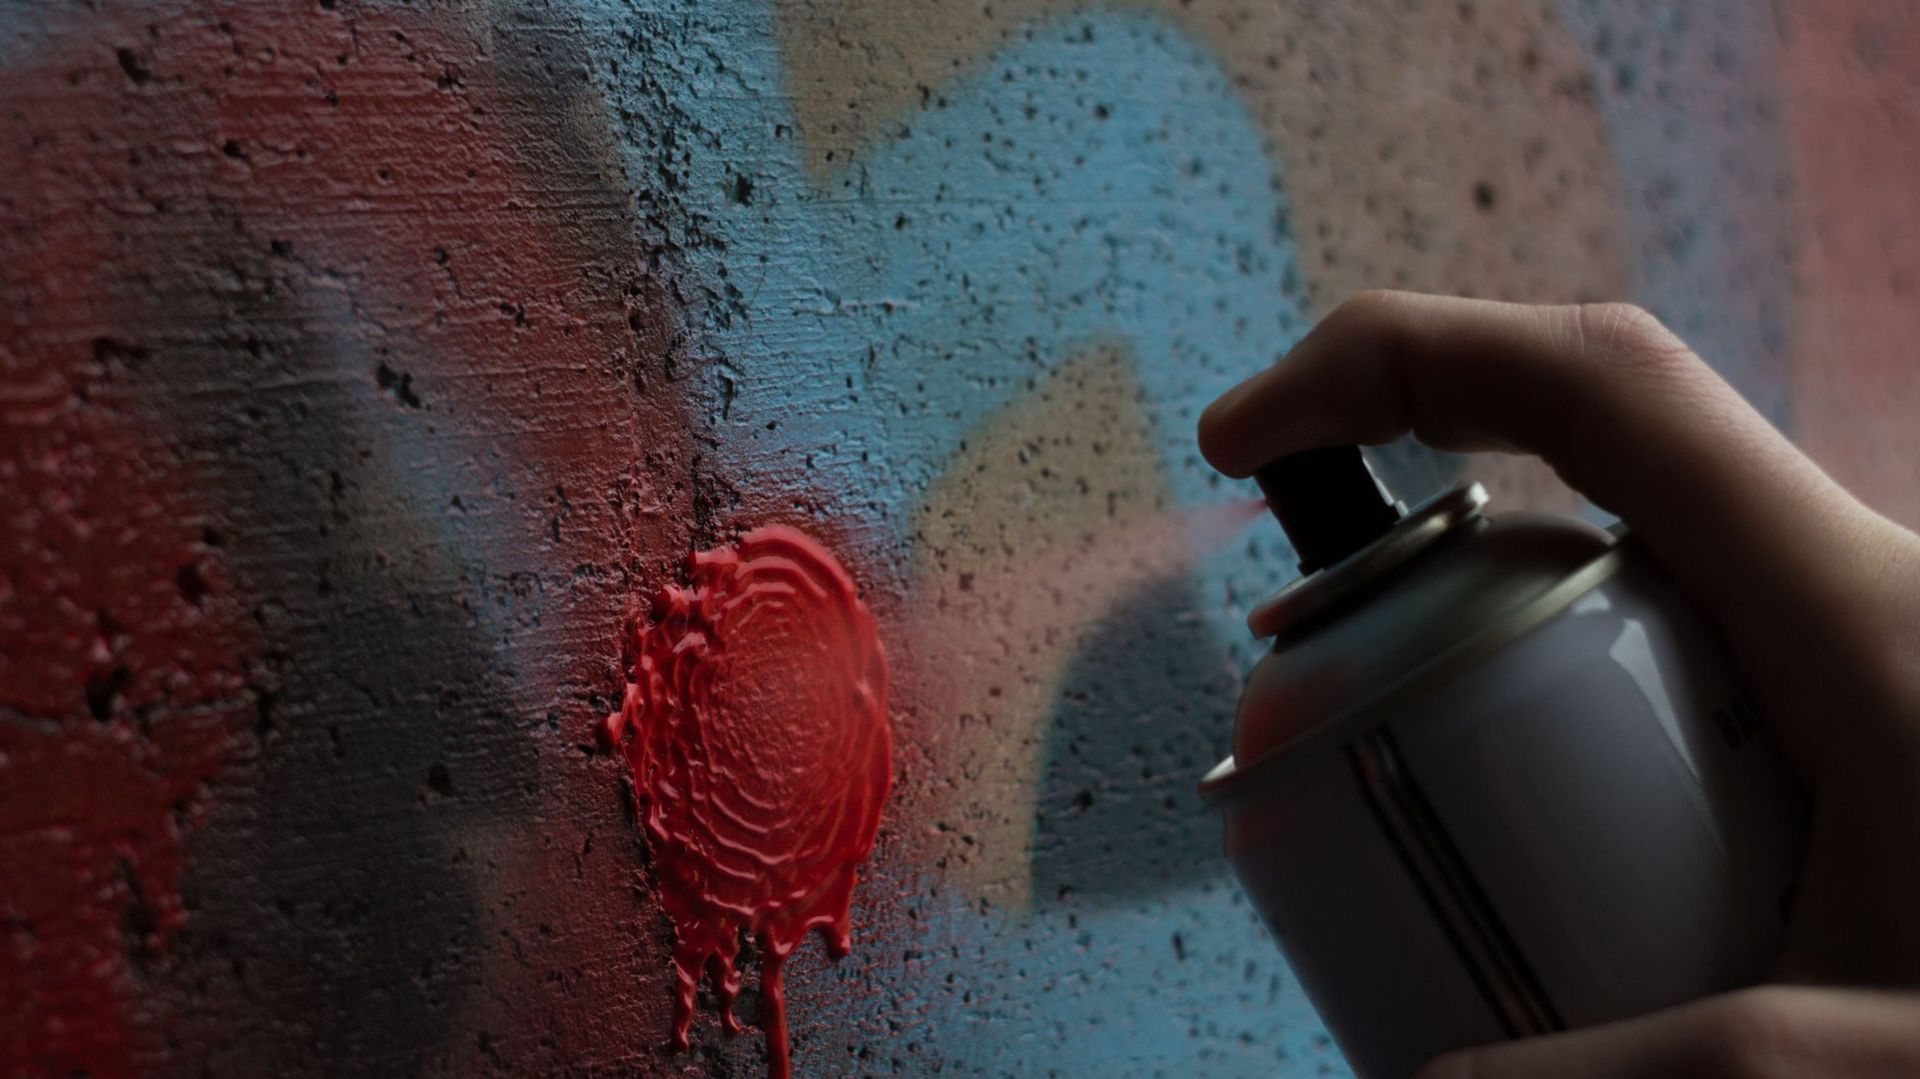 Cropped Image Of Hand Spraying Paint On Wall